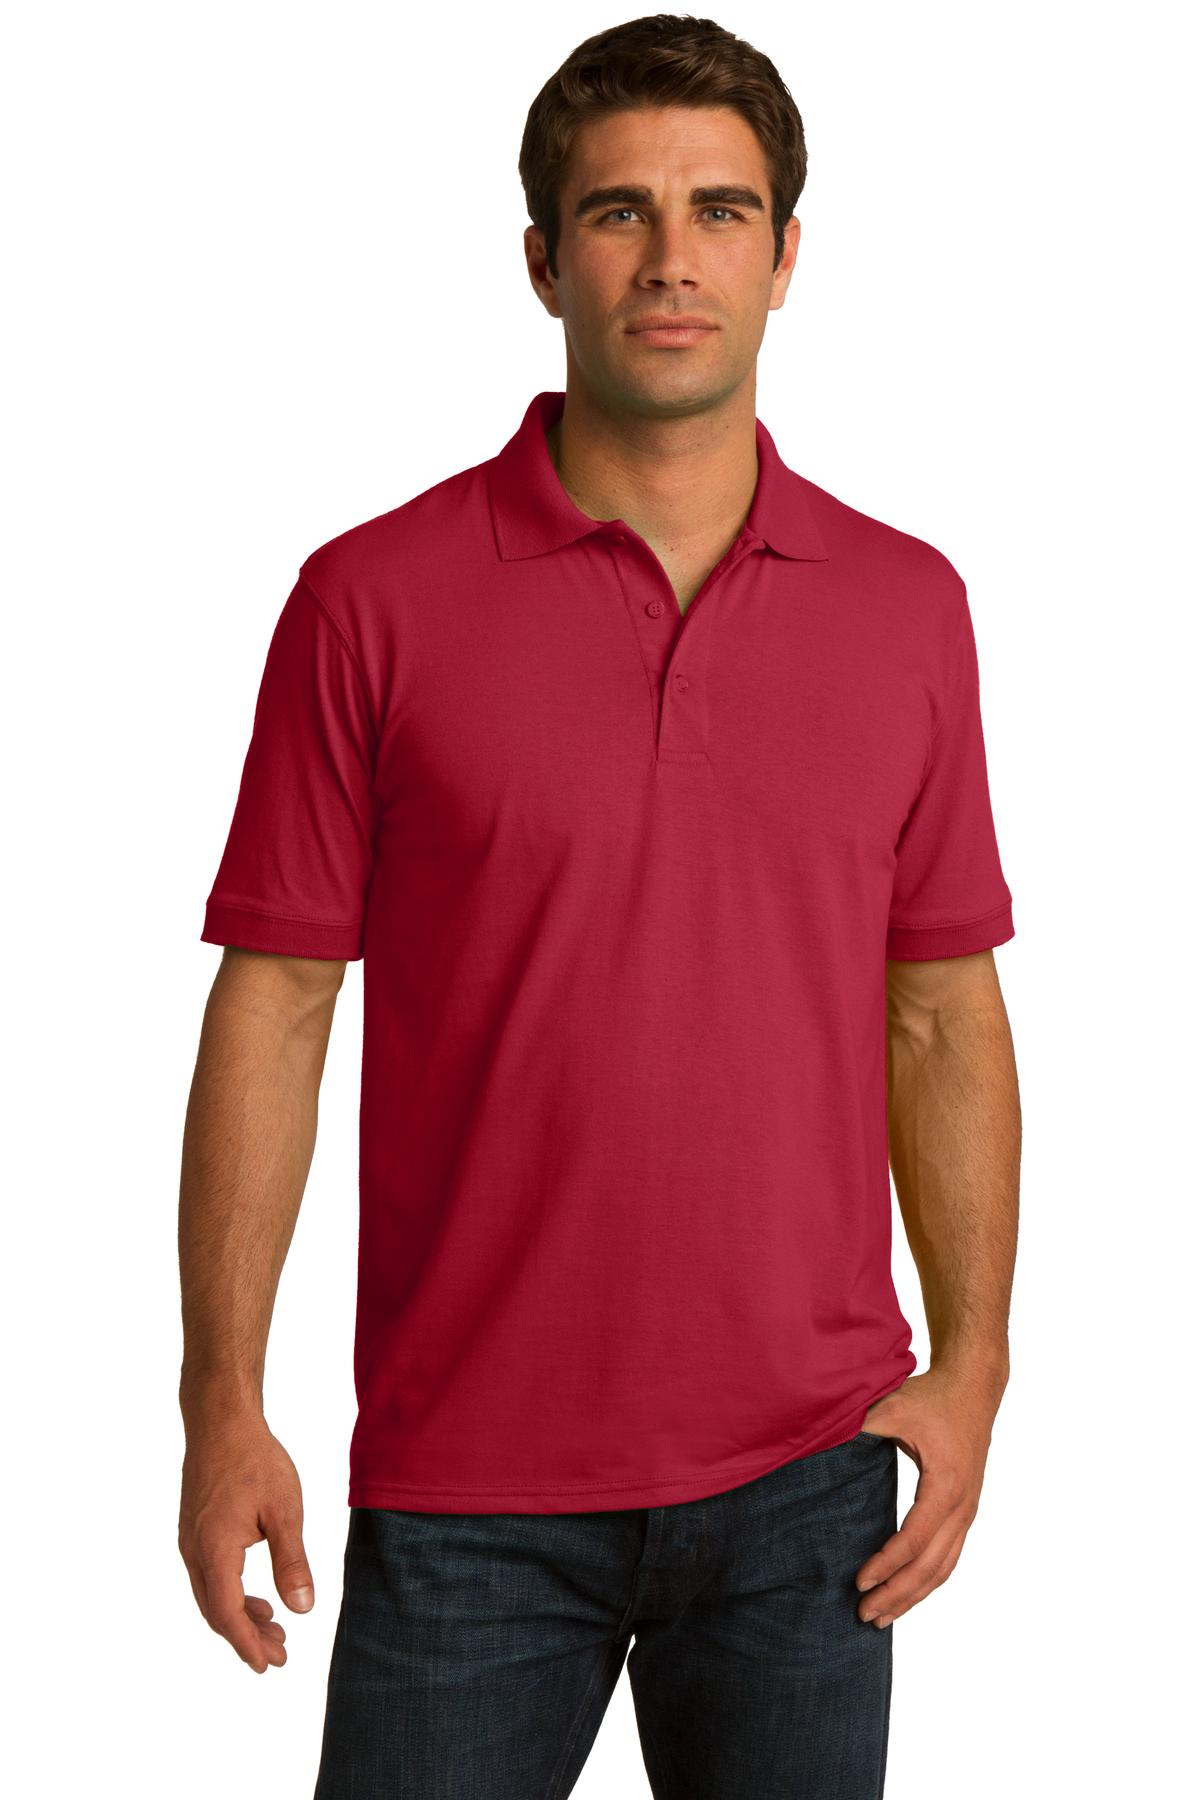 Port & Company Men's KP55T Golf Shirt Tall 5.5-Ounce Jersey Knit Polo - image 1 of 3